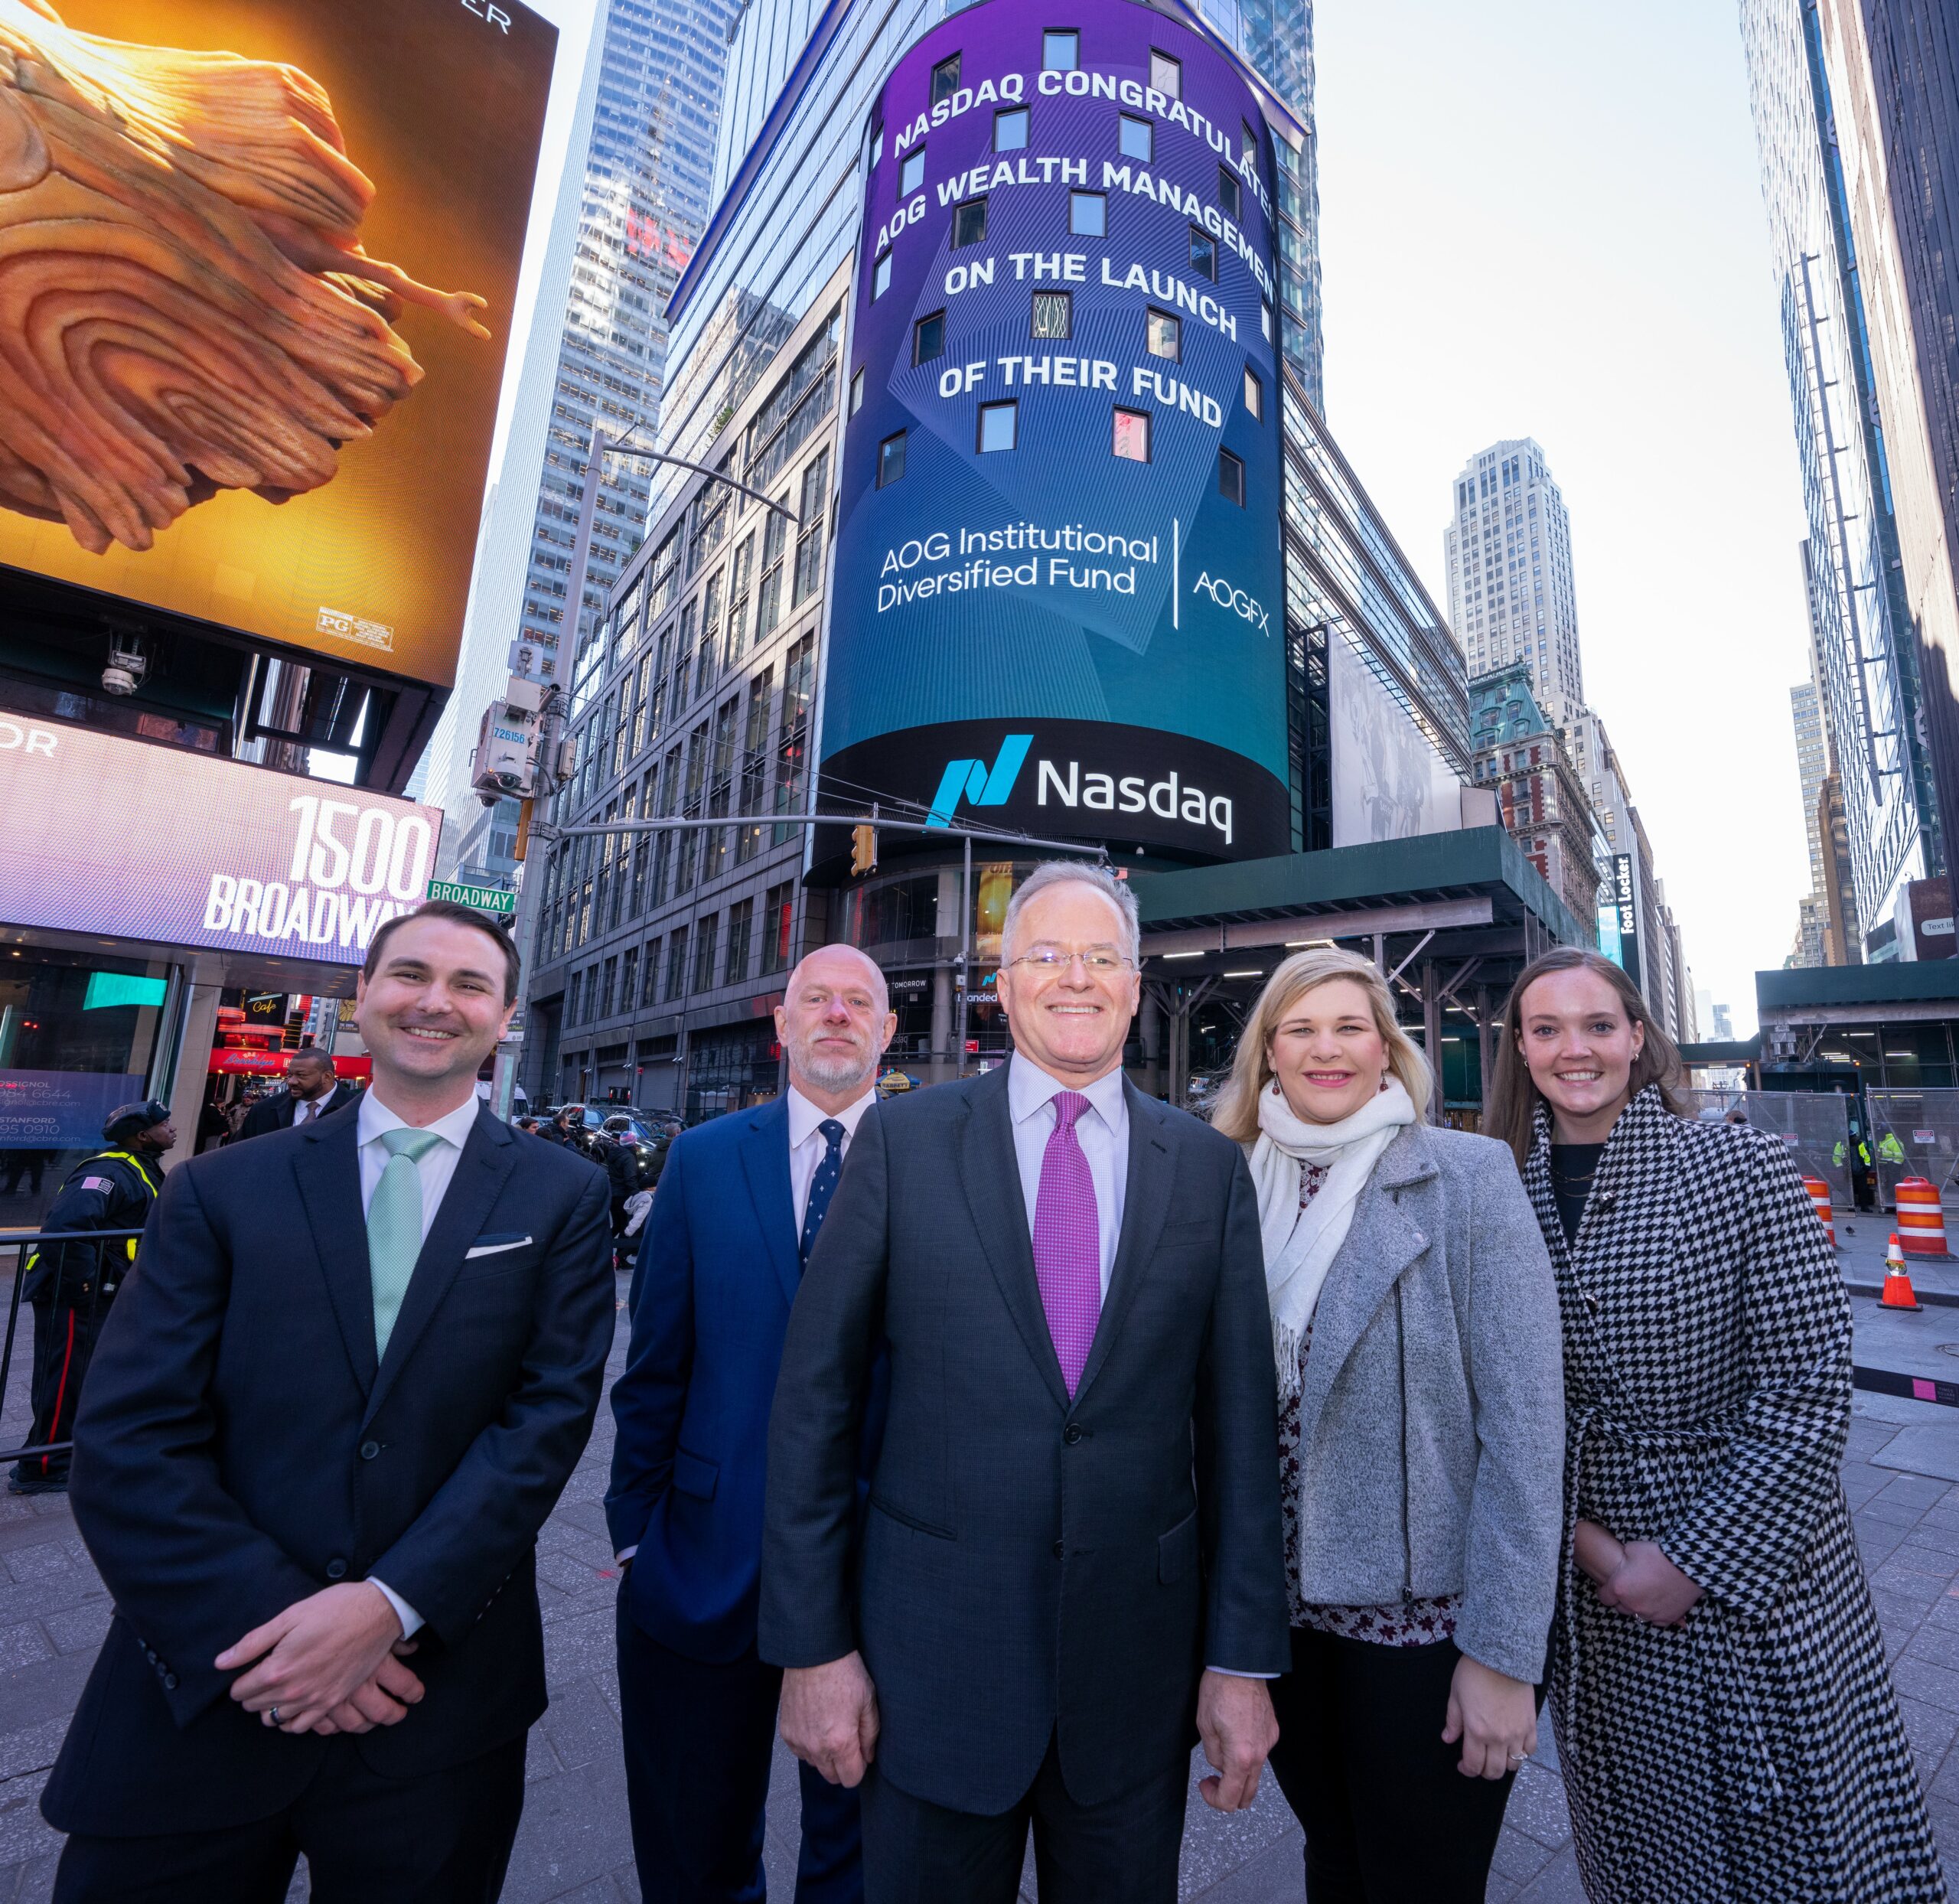 AOG Funds Team in Front of NASDAQ Building